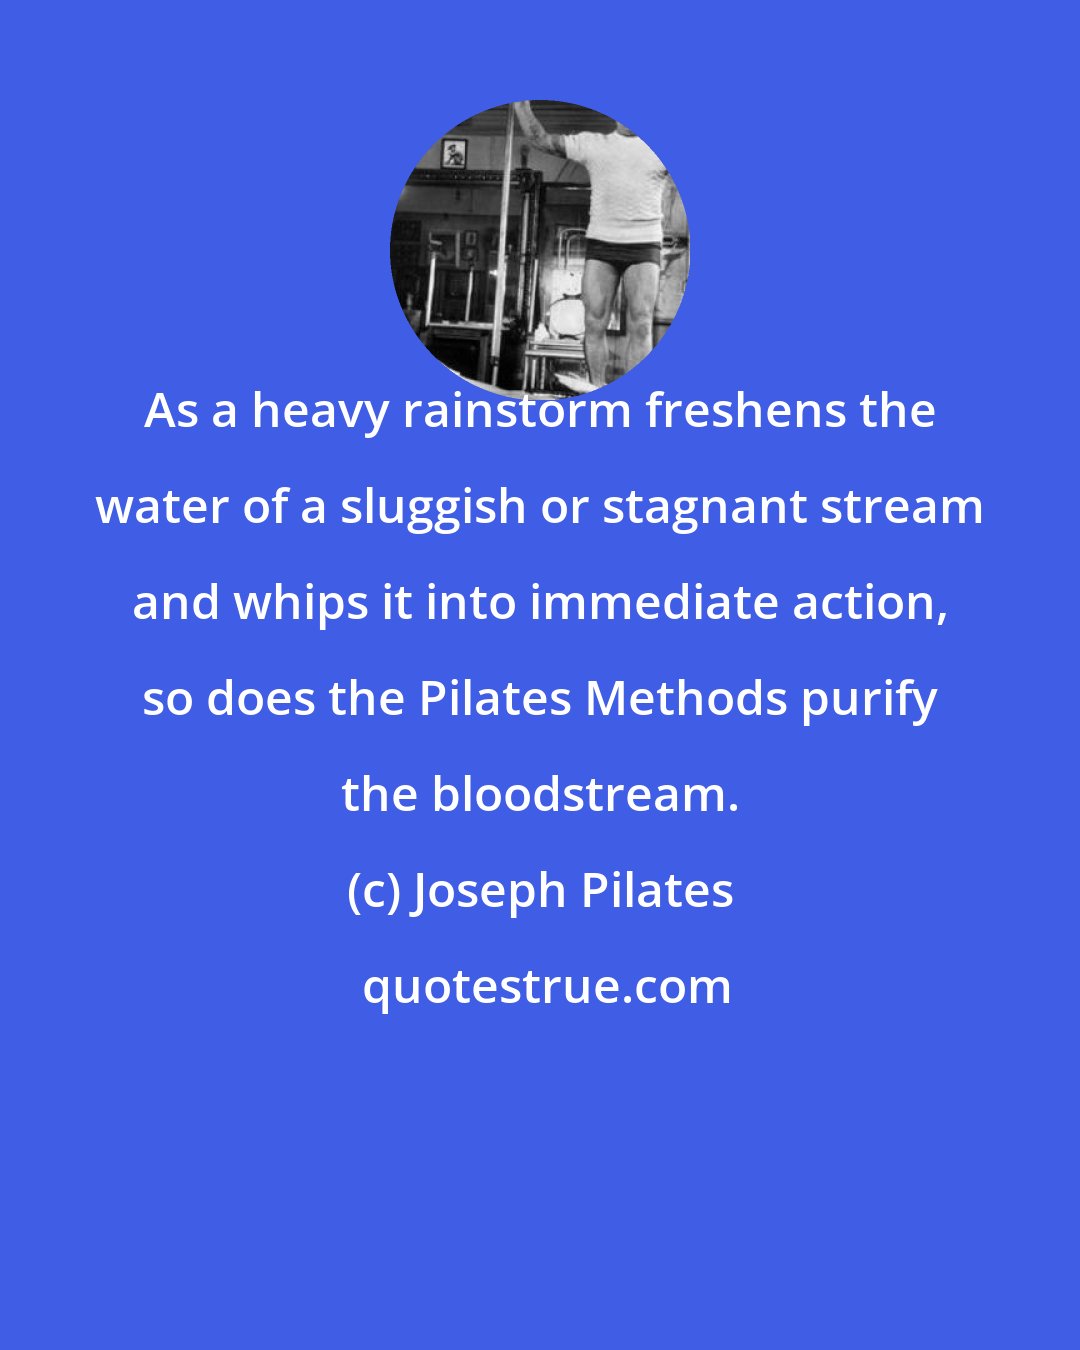 Joseph Pilates: As a heavy rainstorm freshens the water of a sluggish or stagnant stream and whips it into immediate action, so does the Pilates Methods purify the bloodstream.